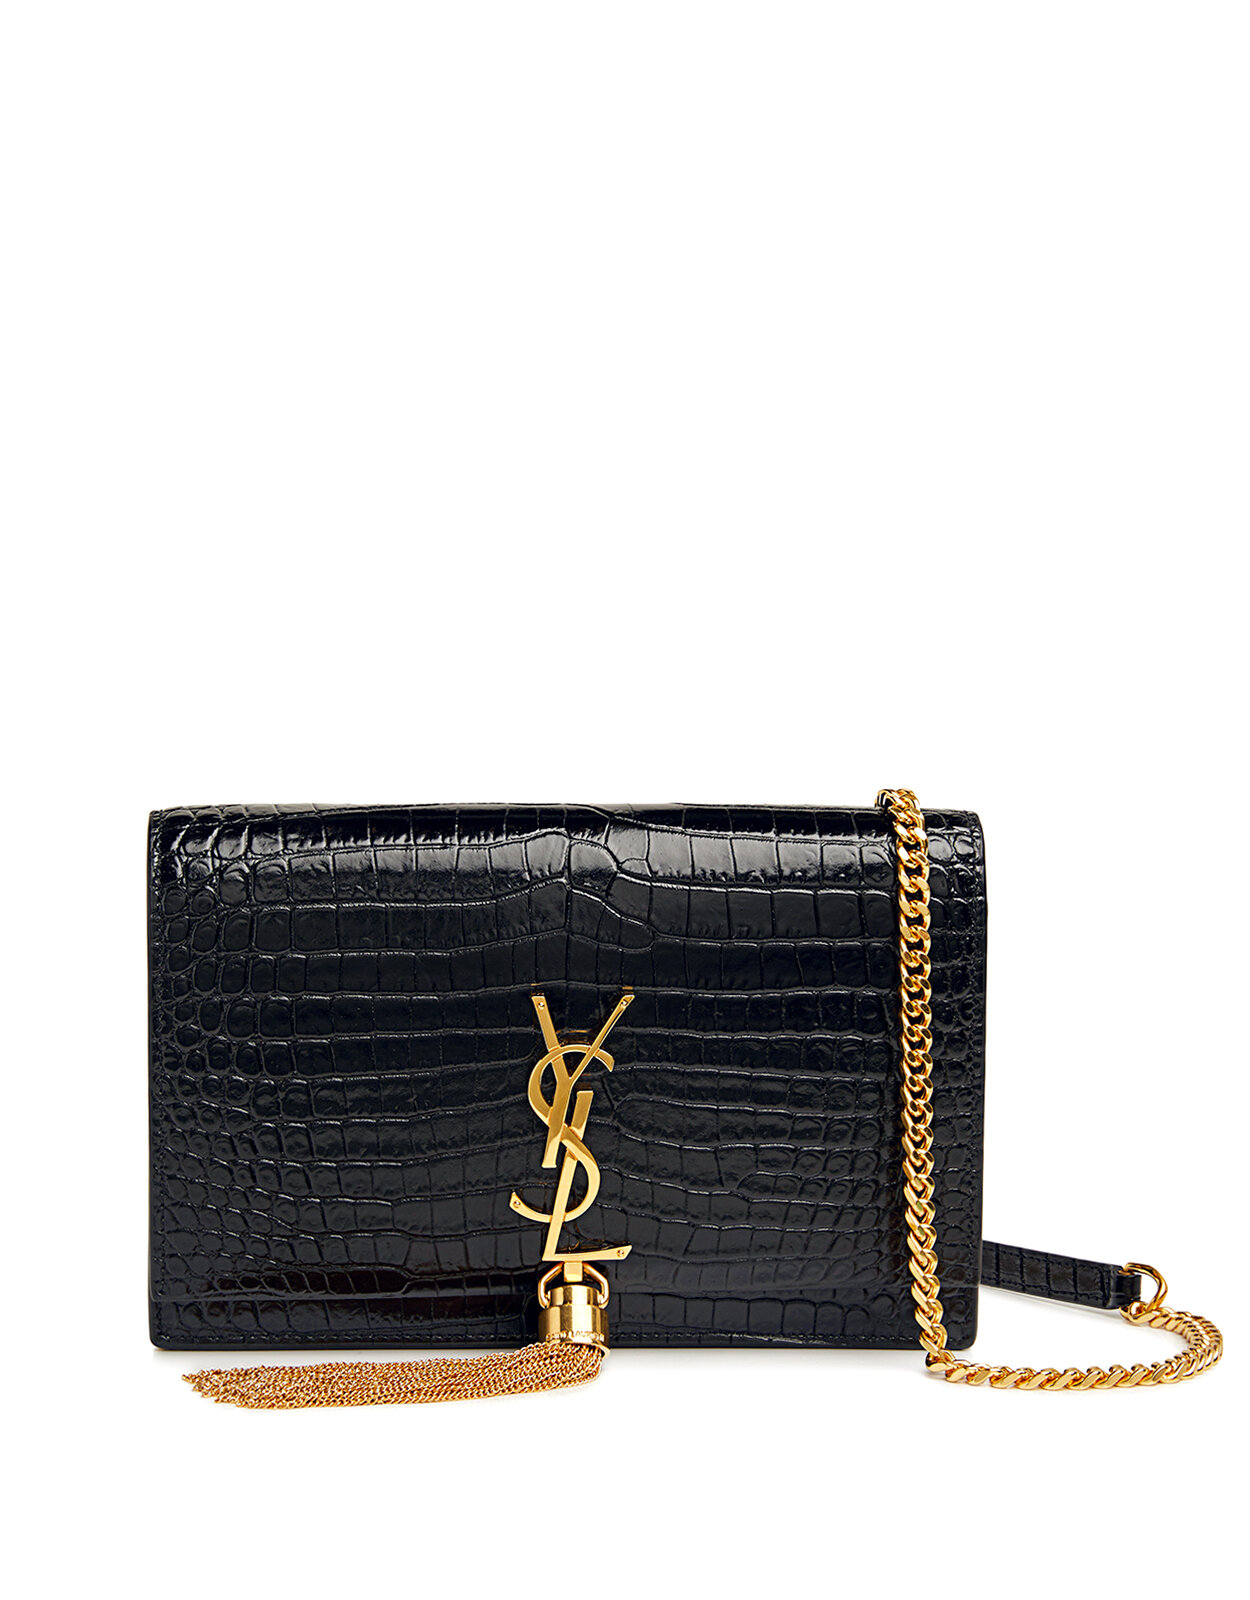 Saint Laurent Small Kate Tassel Bag in Black Crocodile-Embossed Leather  with Gold Hardware — UFO No More